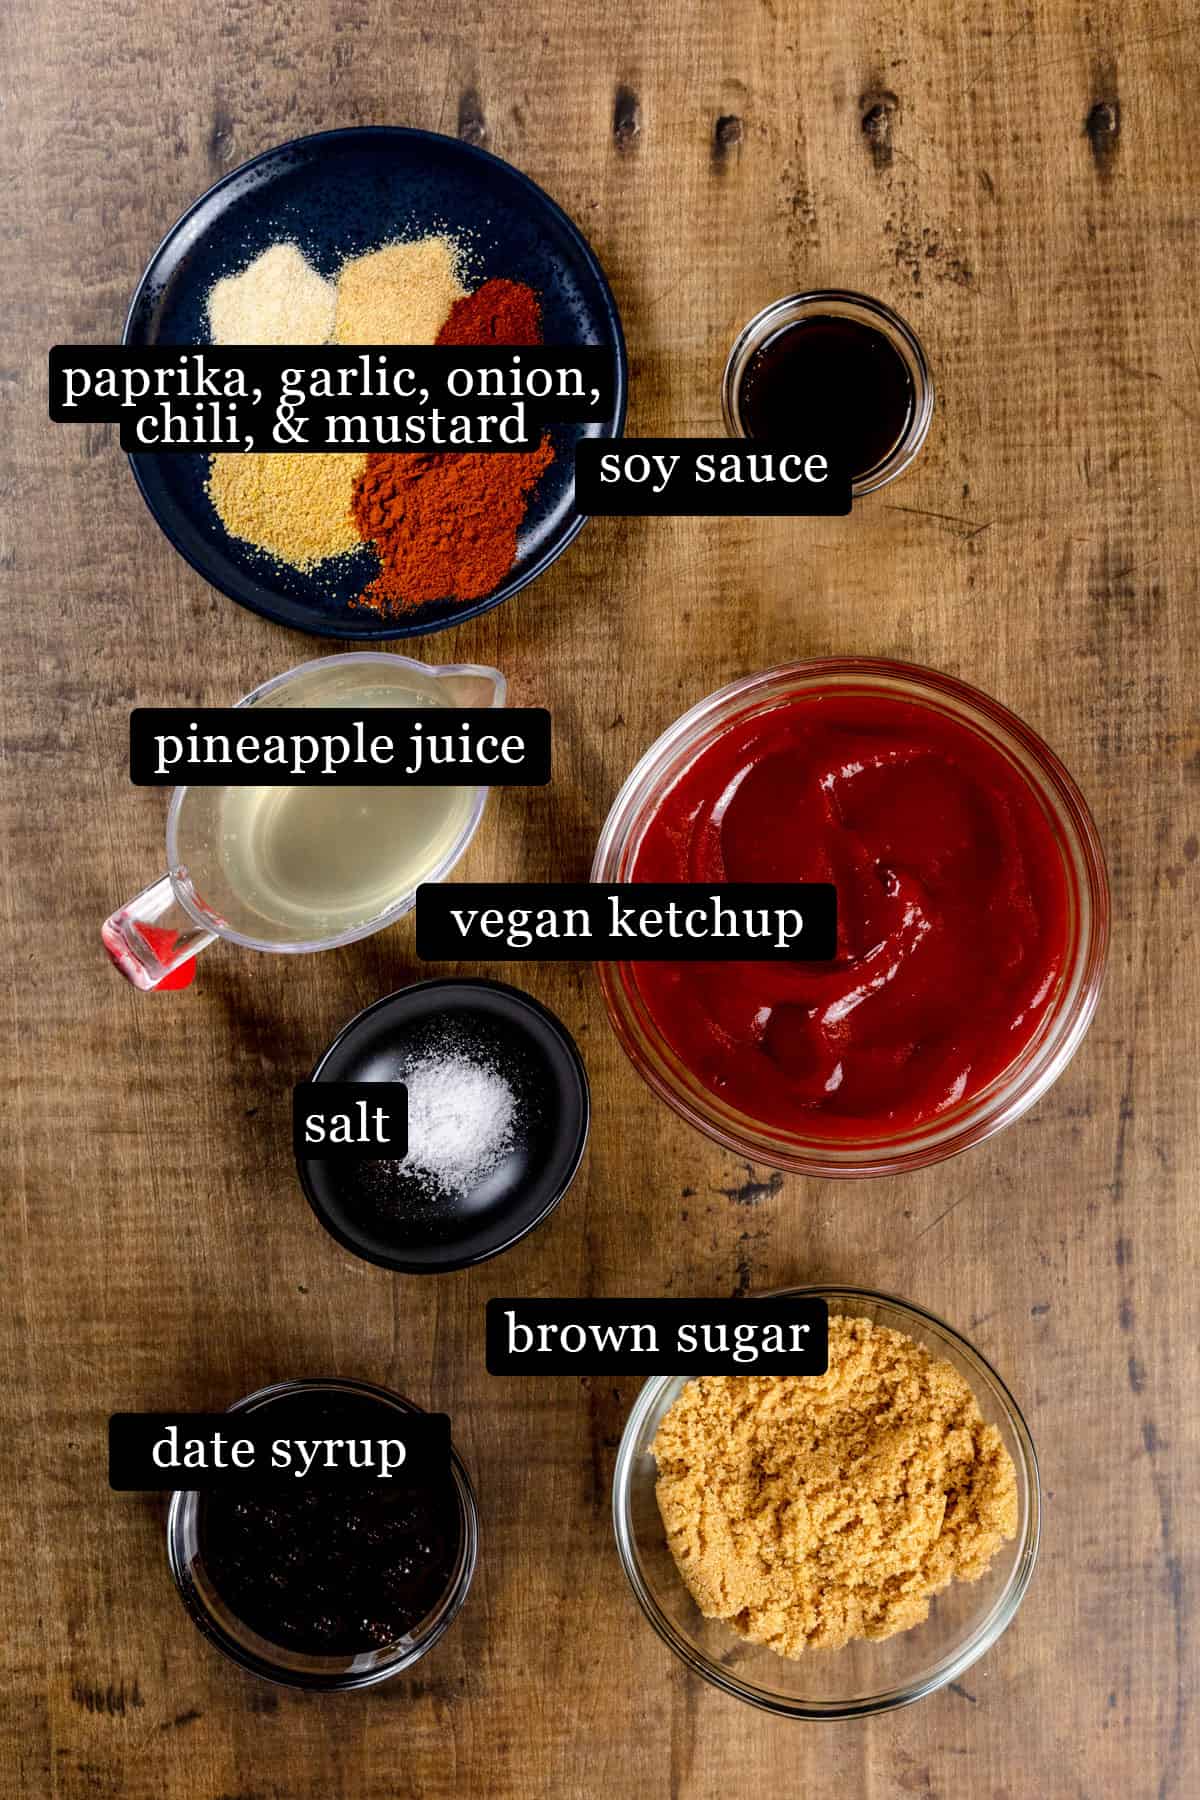 Ingredients for the bbq sauce in various glass bowls and on plates on a kitchen table. Black and white labels have been added to name each ingredient.